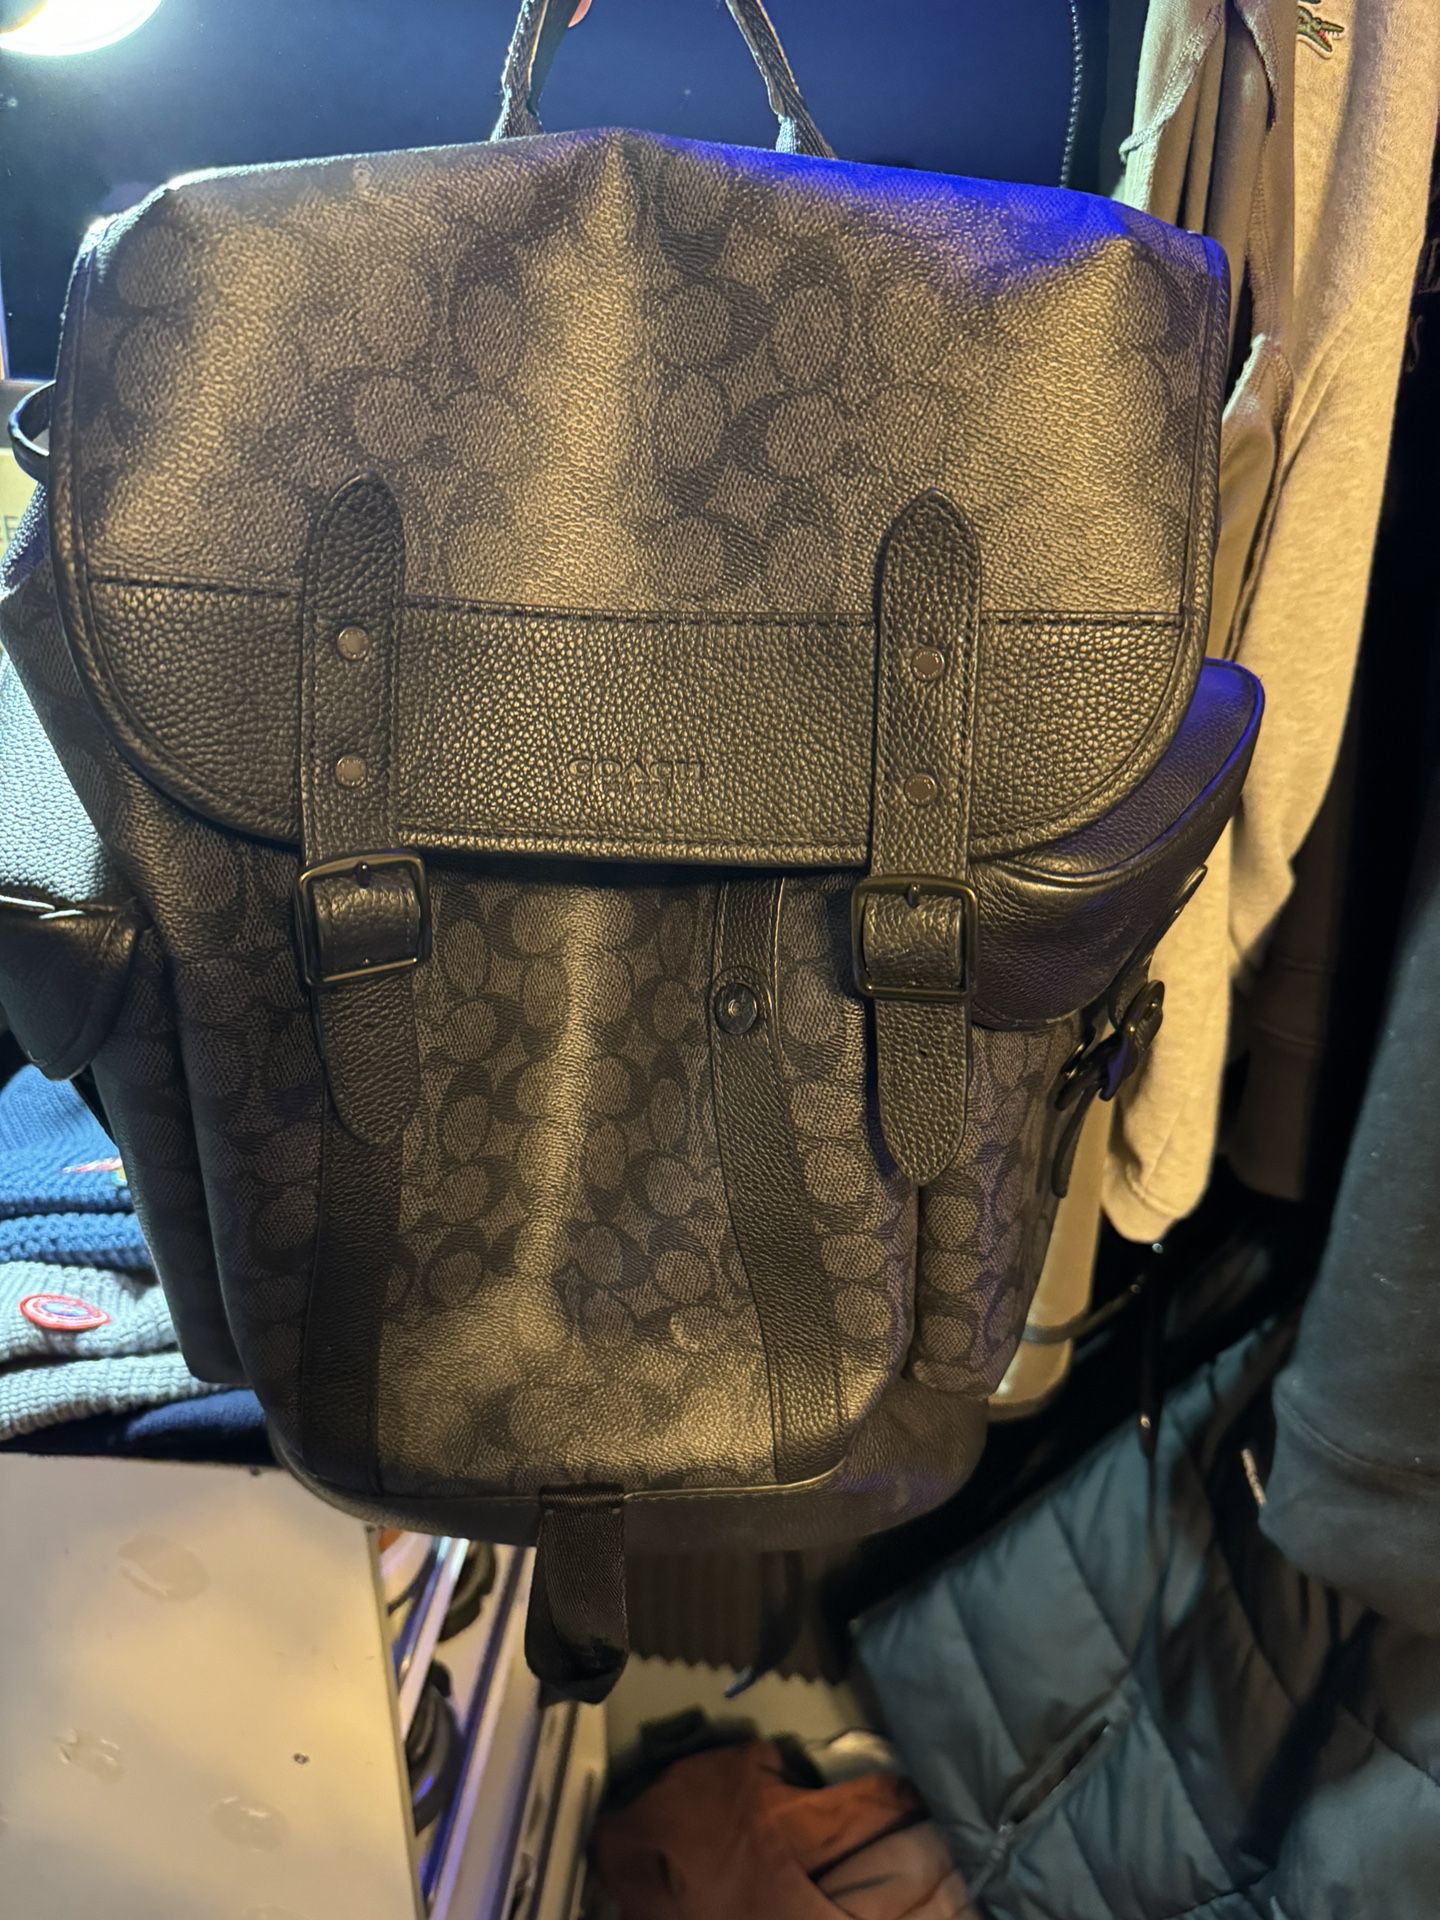 Coach Hitch Backpack In Signature Canvas